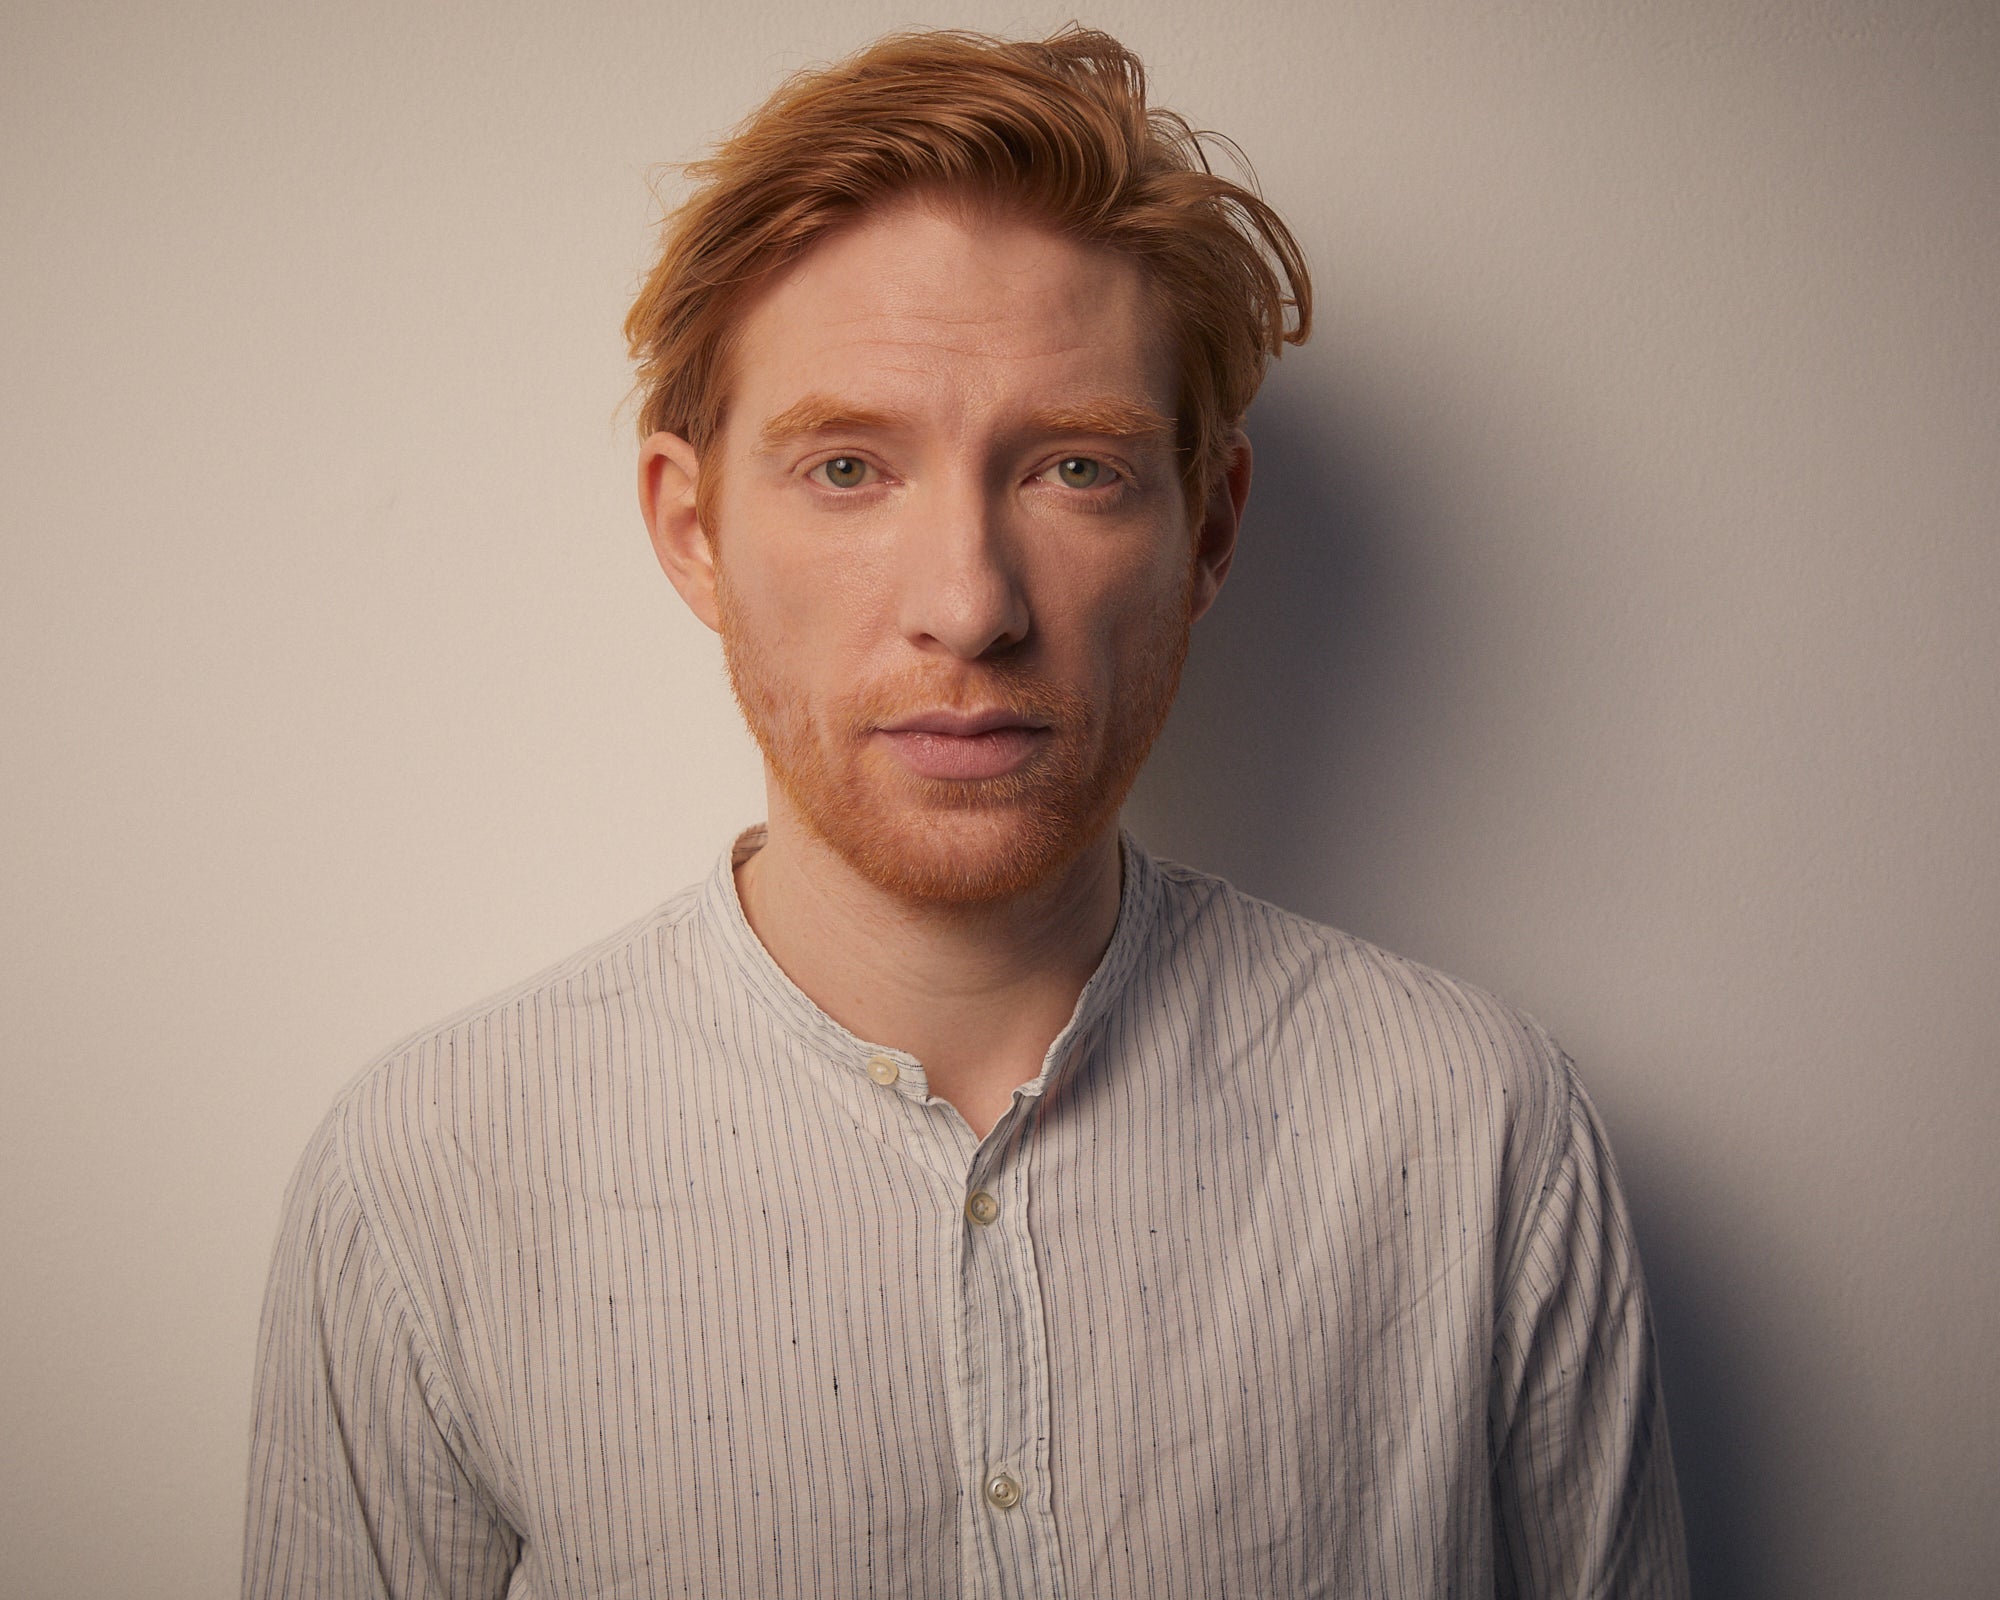 In 2015, when several of his films were nominated for awards, Gleeson decided to skip the ceremonies as he ‘didn’t fancy it’